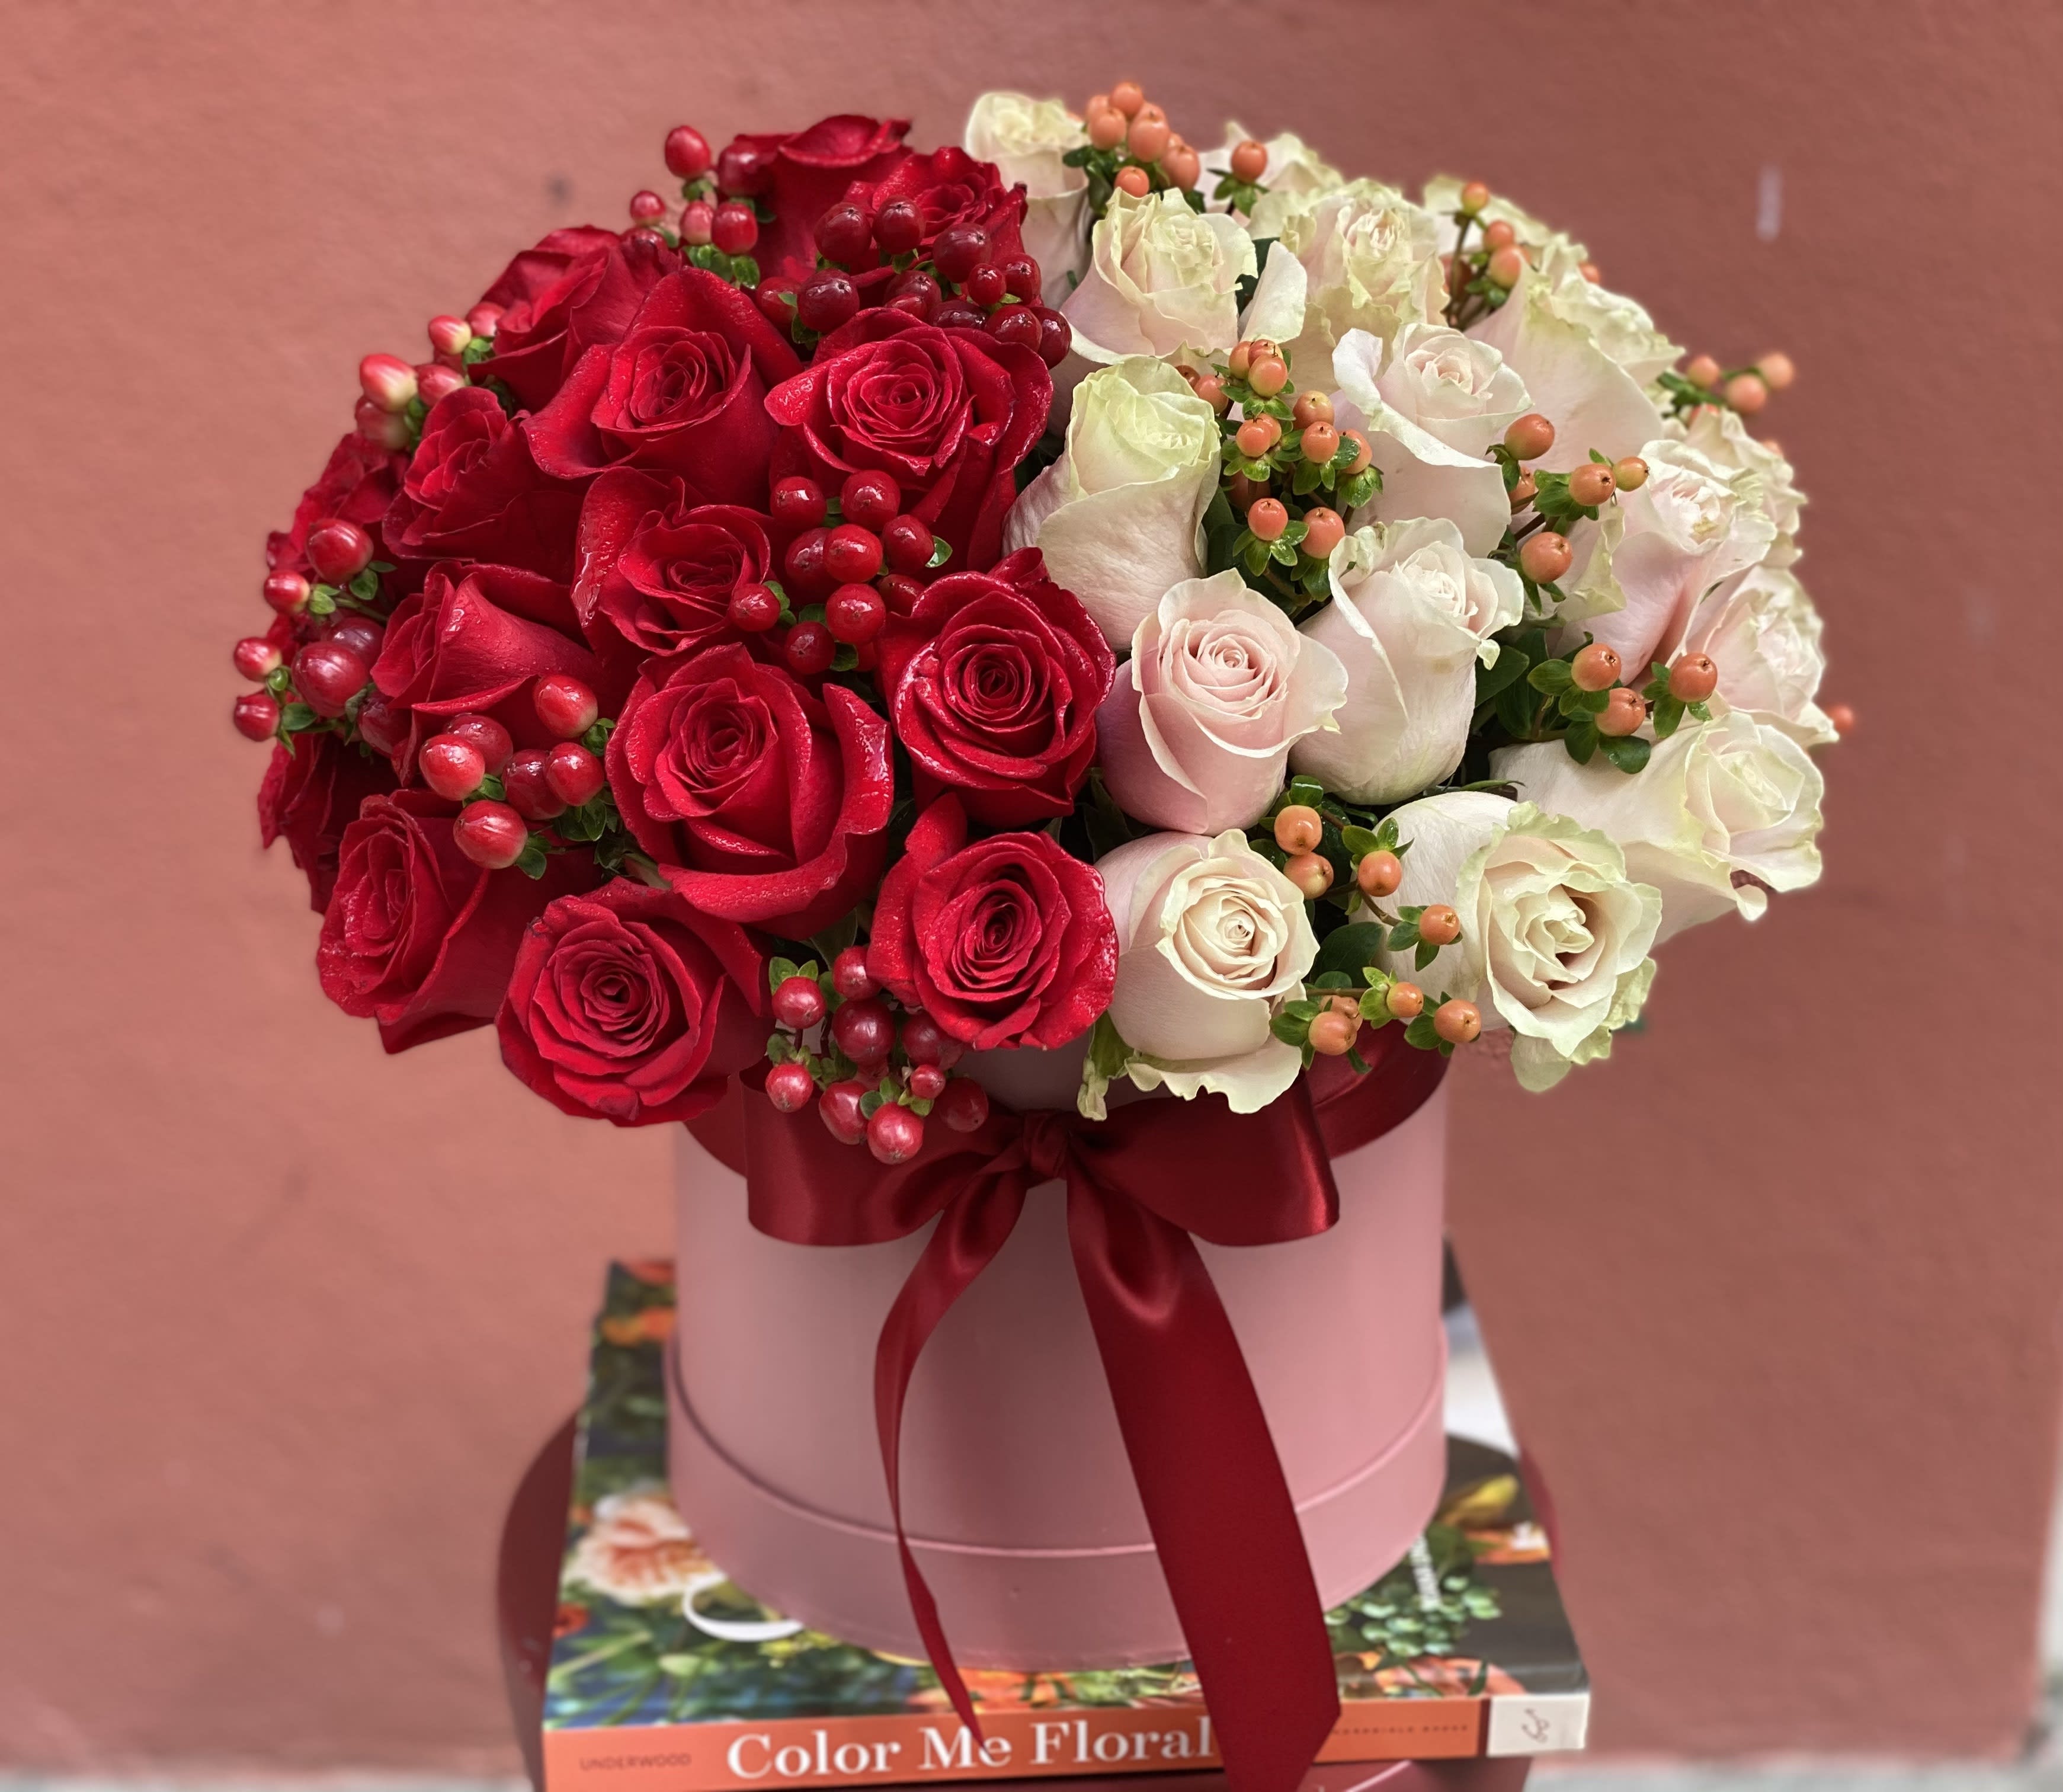 OH! THIS BOX FULL OF ROSES - This box is the perfect gift to show your love. Full of roses, all high quality, big headed. We can make it bicolor or all red, or all pink. You just let us know your preference  in &quot;message for the florist&quot;, while placing your order.  The size of the box is 10&quot; diameter x 7.5&quot; height. Once we place the flowers, the whole arrangement will be aprox 20&quot; diameter and 14.5&quot; height.